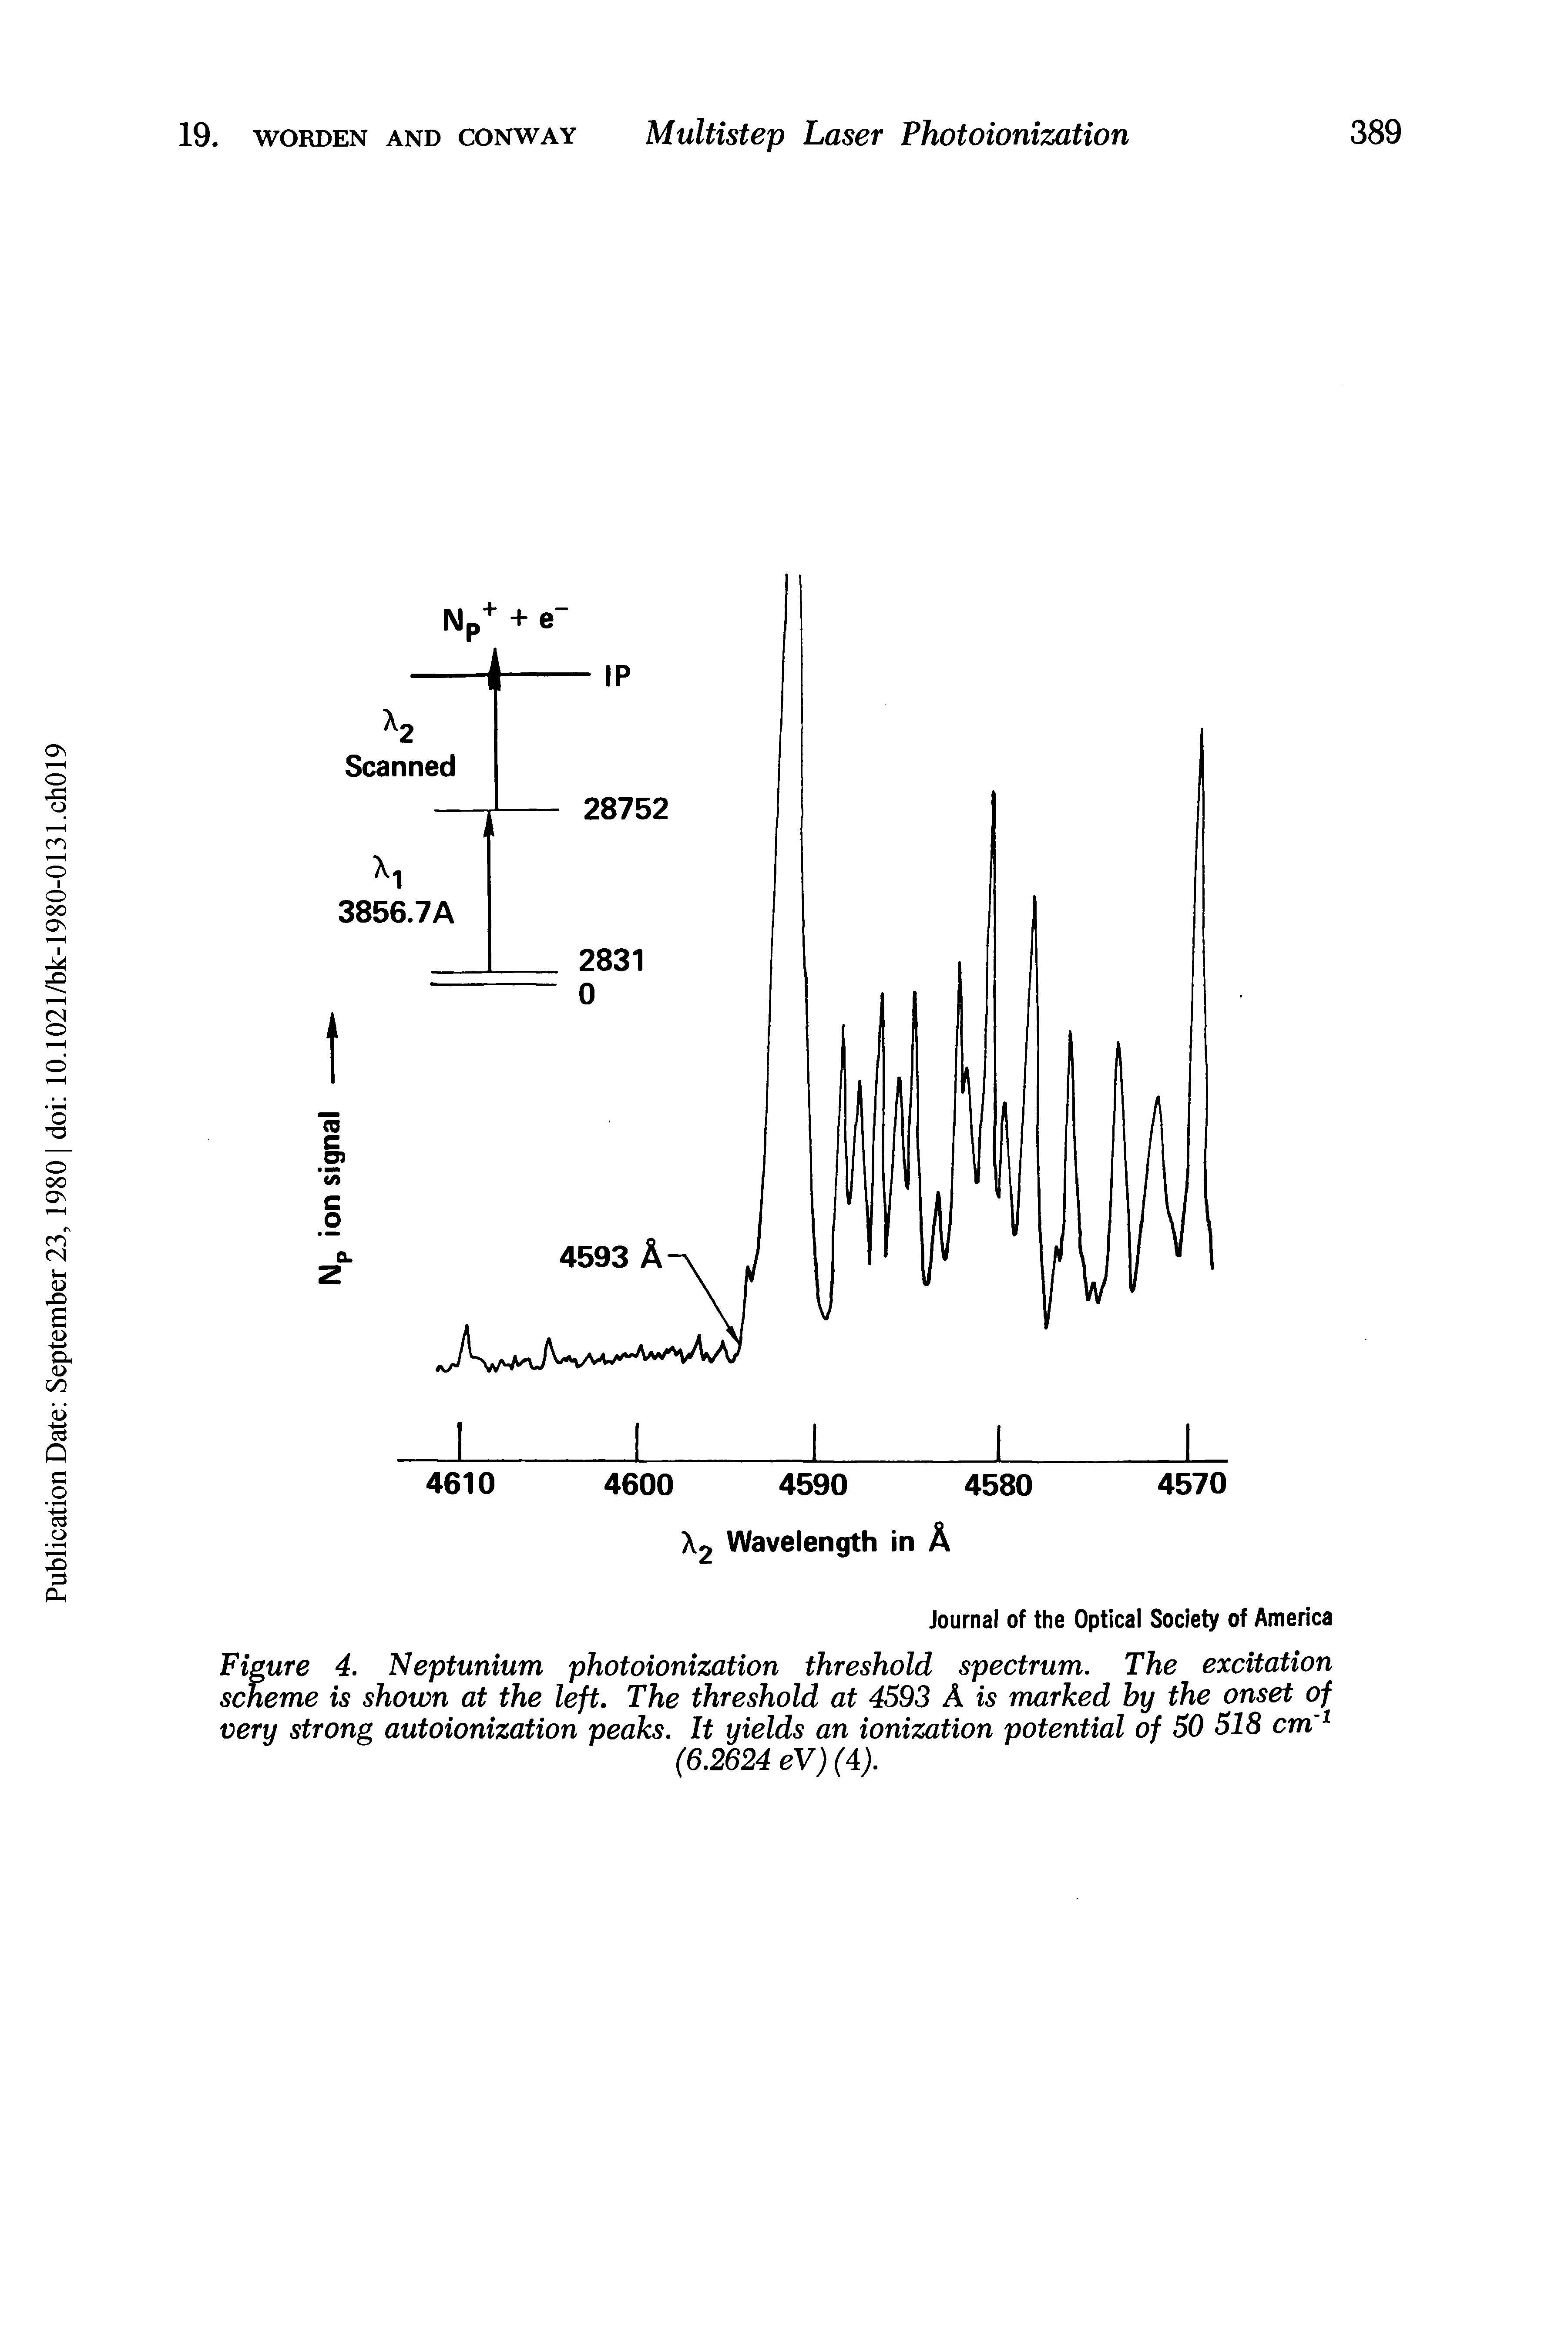 Figure 4. Neptunium photoionization threshold spectrum. The excitation scheme is shown at the left. The threshold at 4593 A is marked by the onset of very strong autoionization peaks. It yields an ionization potential of 50 518 cm 1...